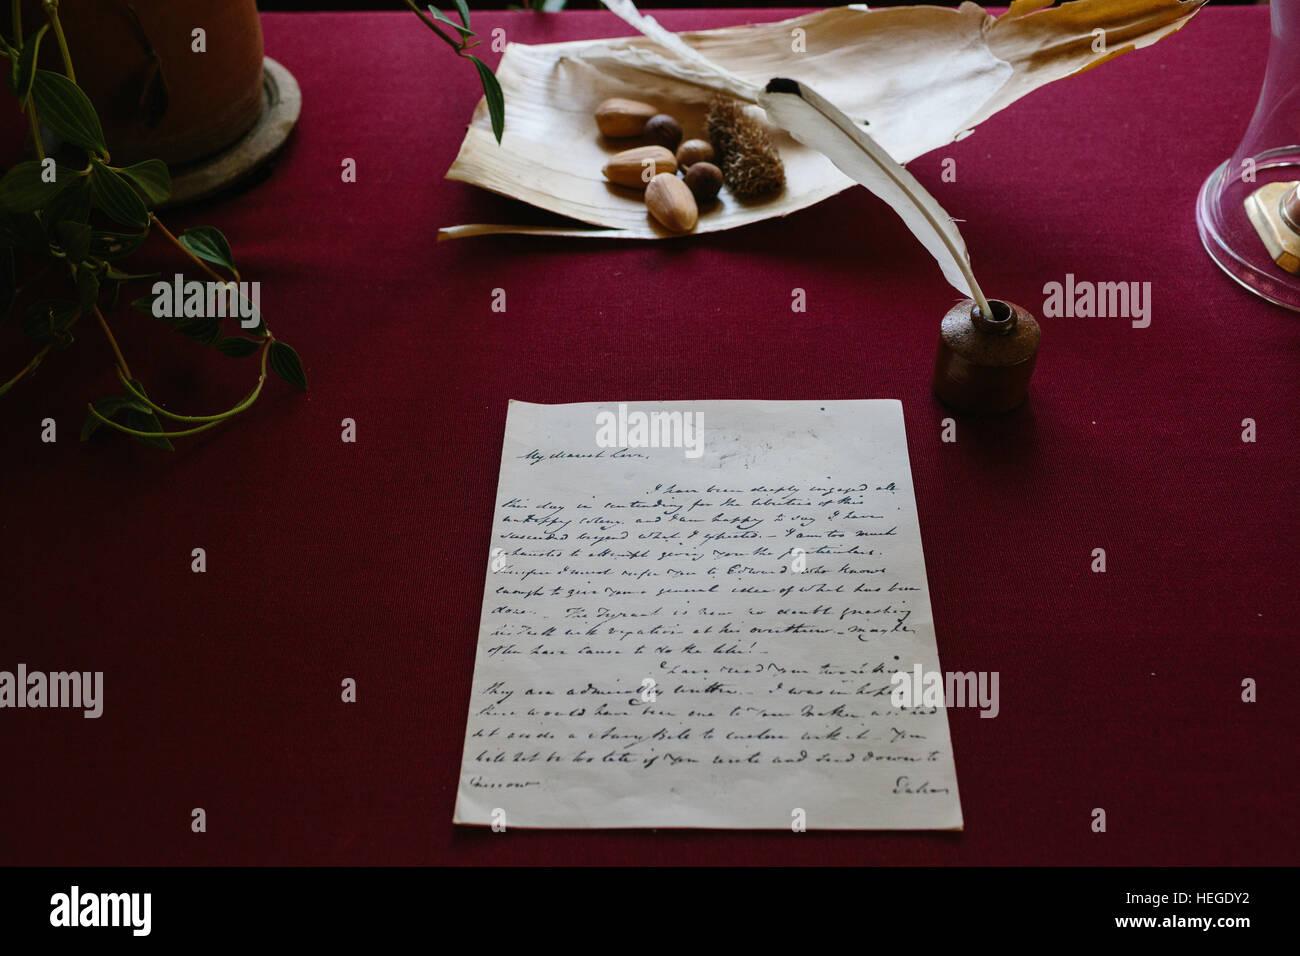 A handwritten letter on a red desk at Elizabeth Farm, an historical homestead and museum in Sydney Australia Stock Photo